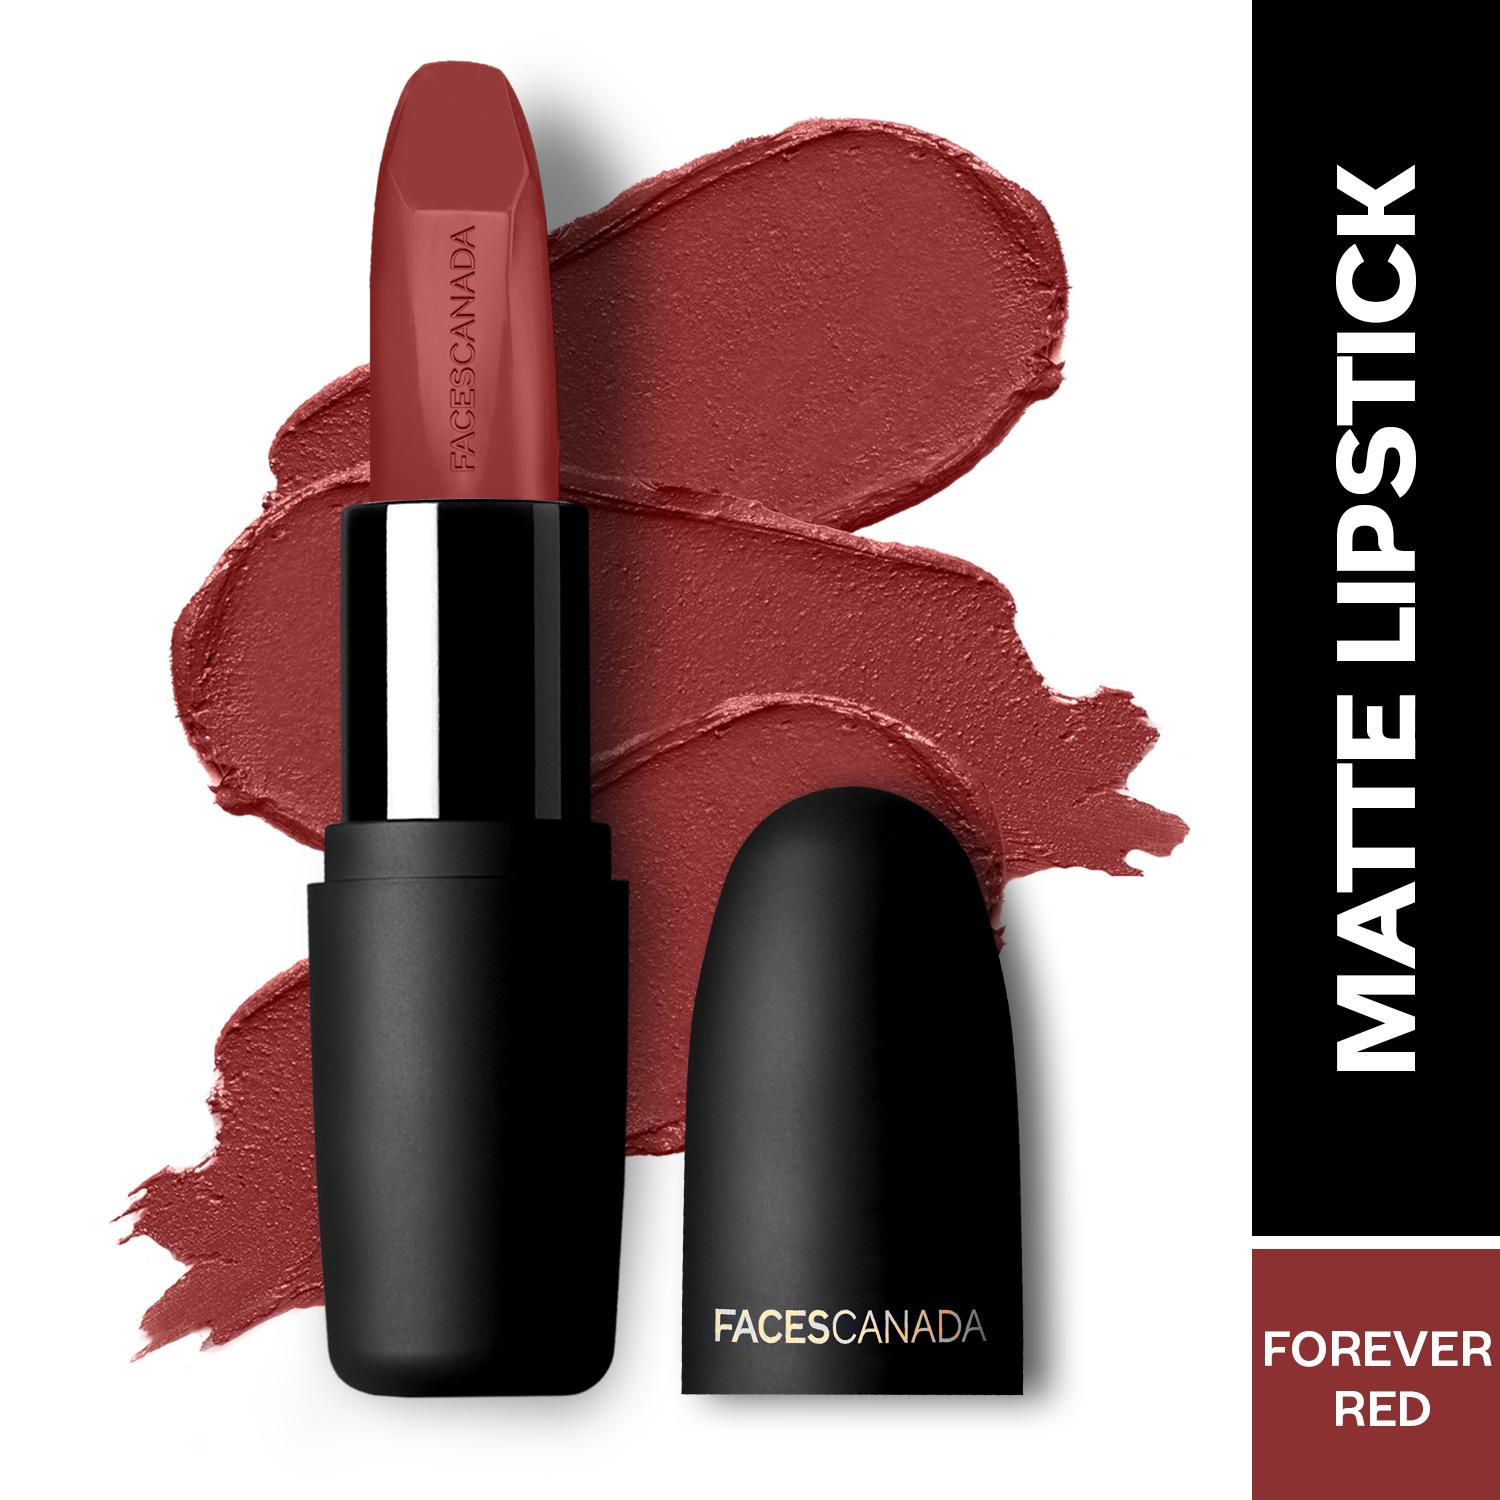 Faces Canada | Faces Canada Weightless Matte Lipstick, Pigmented and Hydrated Lips - Forever Red 03 (4.5 g)